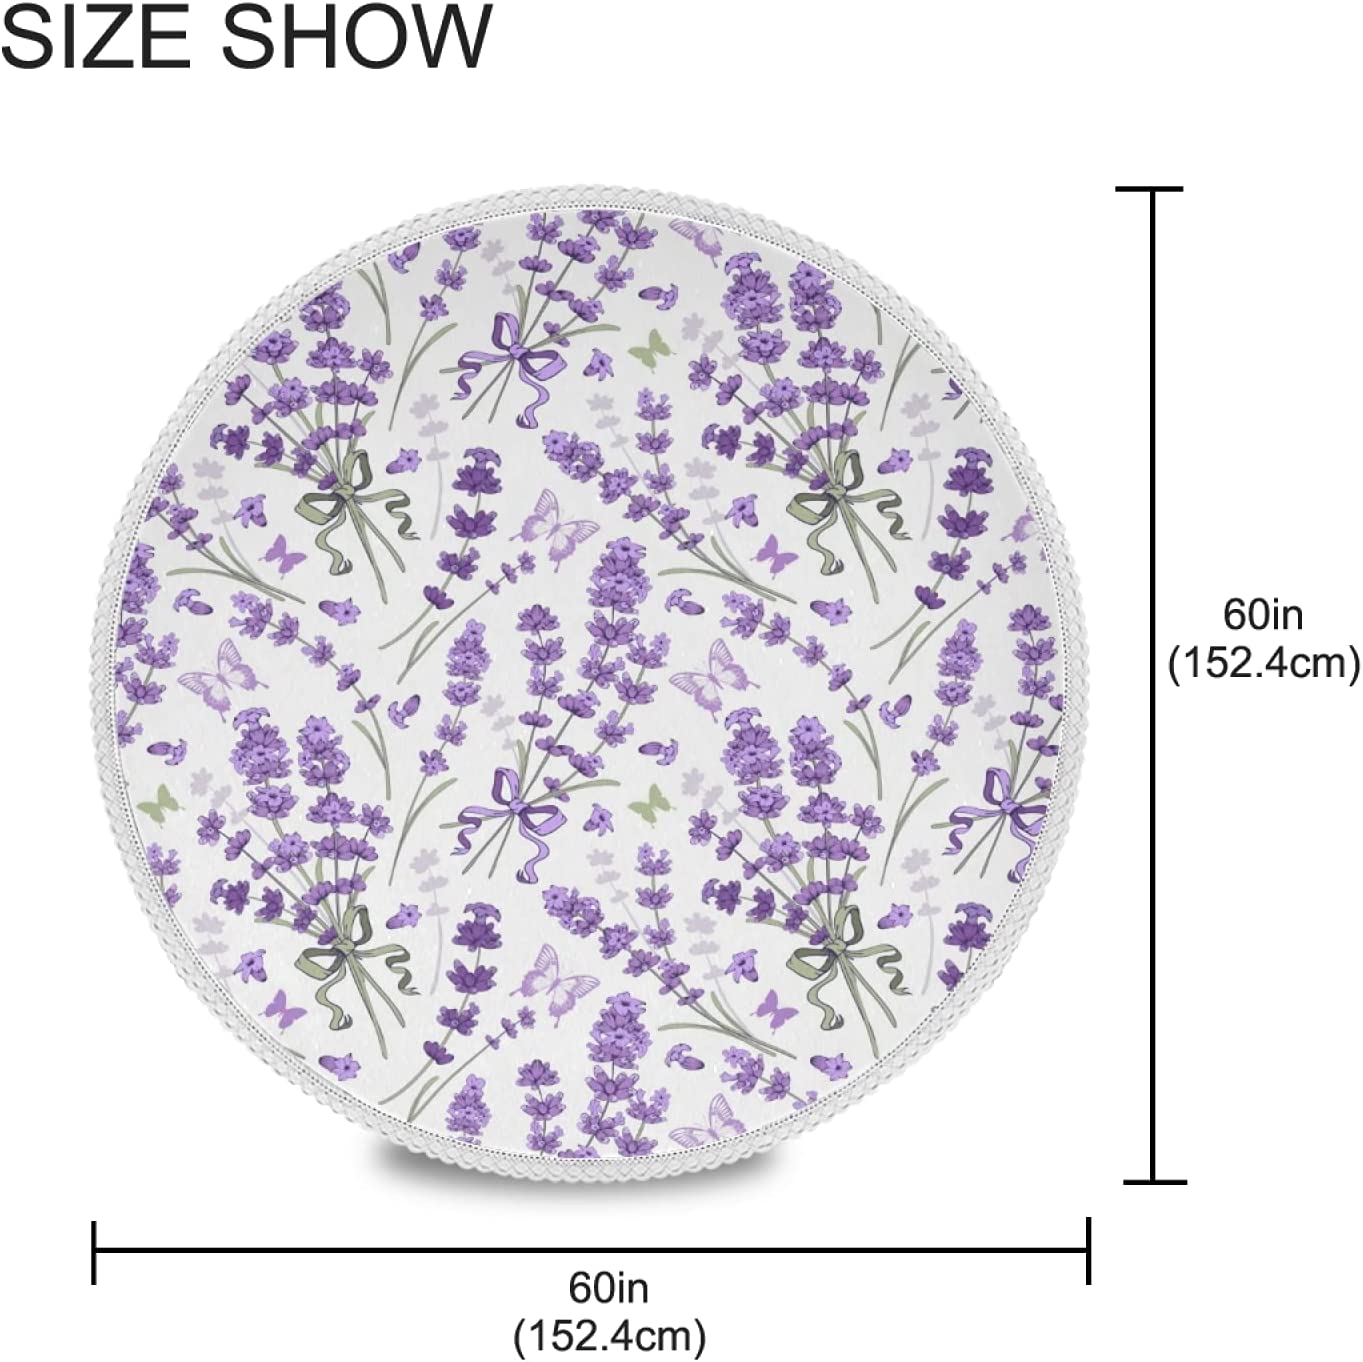 Floral Lavender Round Tablecloth Washable Table Cloths Cover For Party Picnic Dining Décor